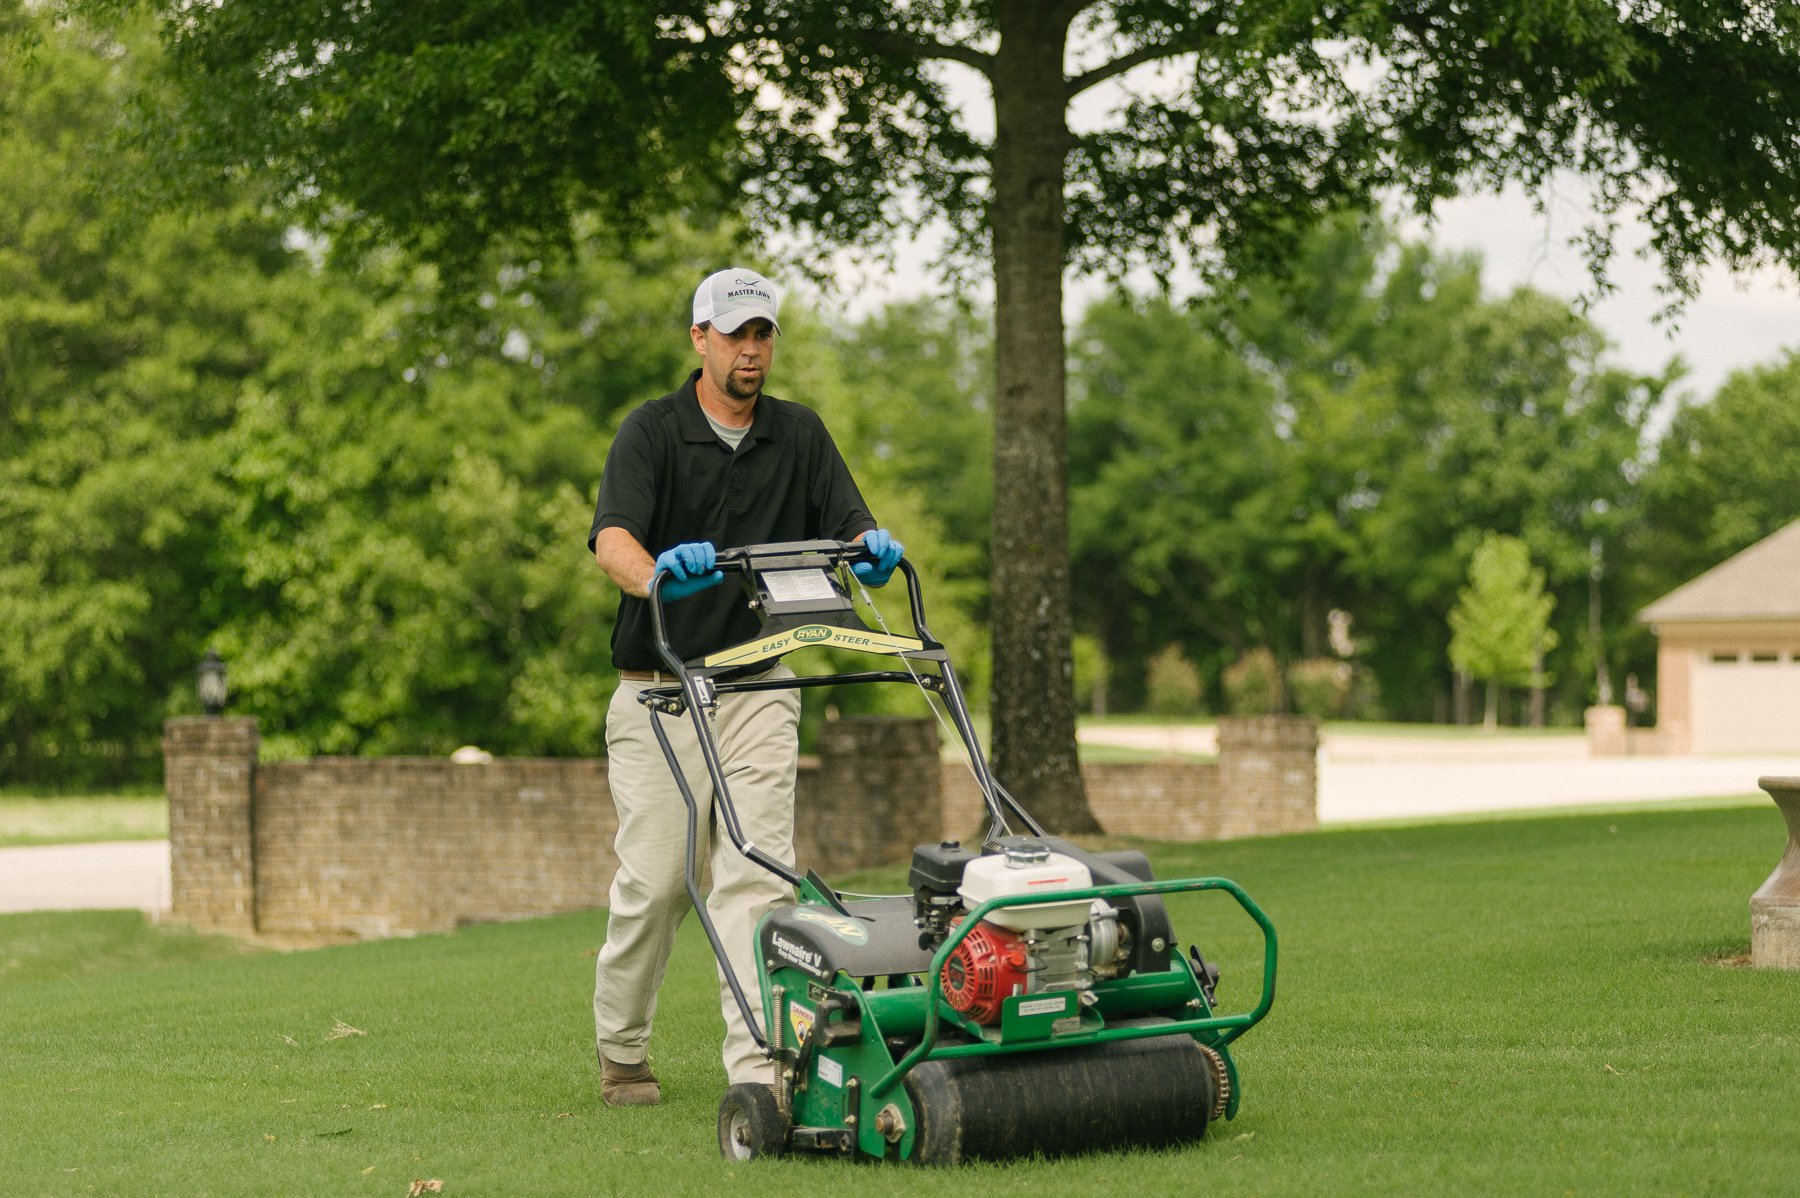 5 Things You Definitely Want to Know about Aerating & Overseeding Your